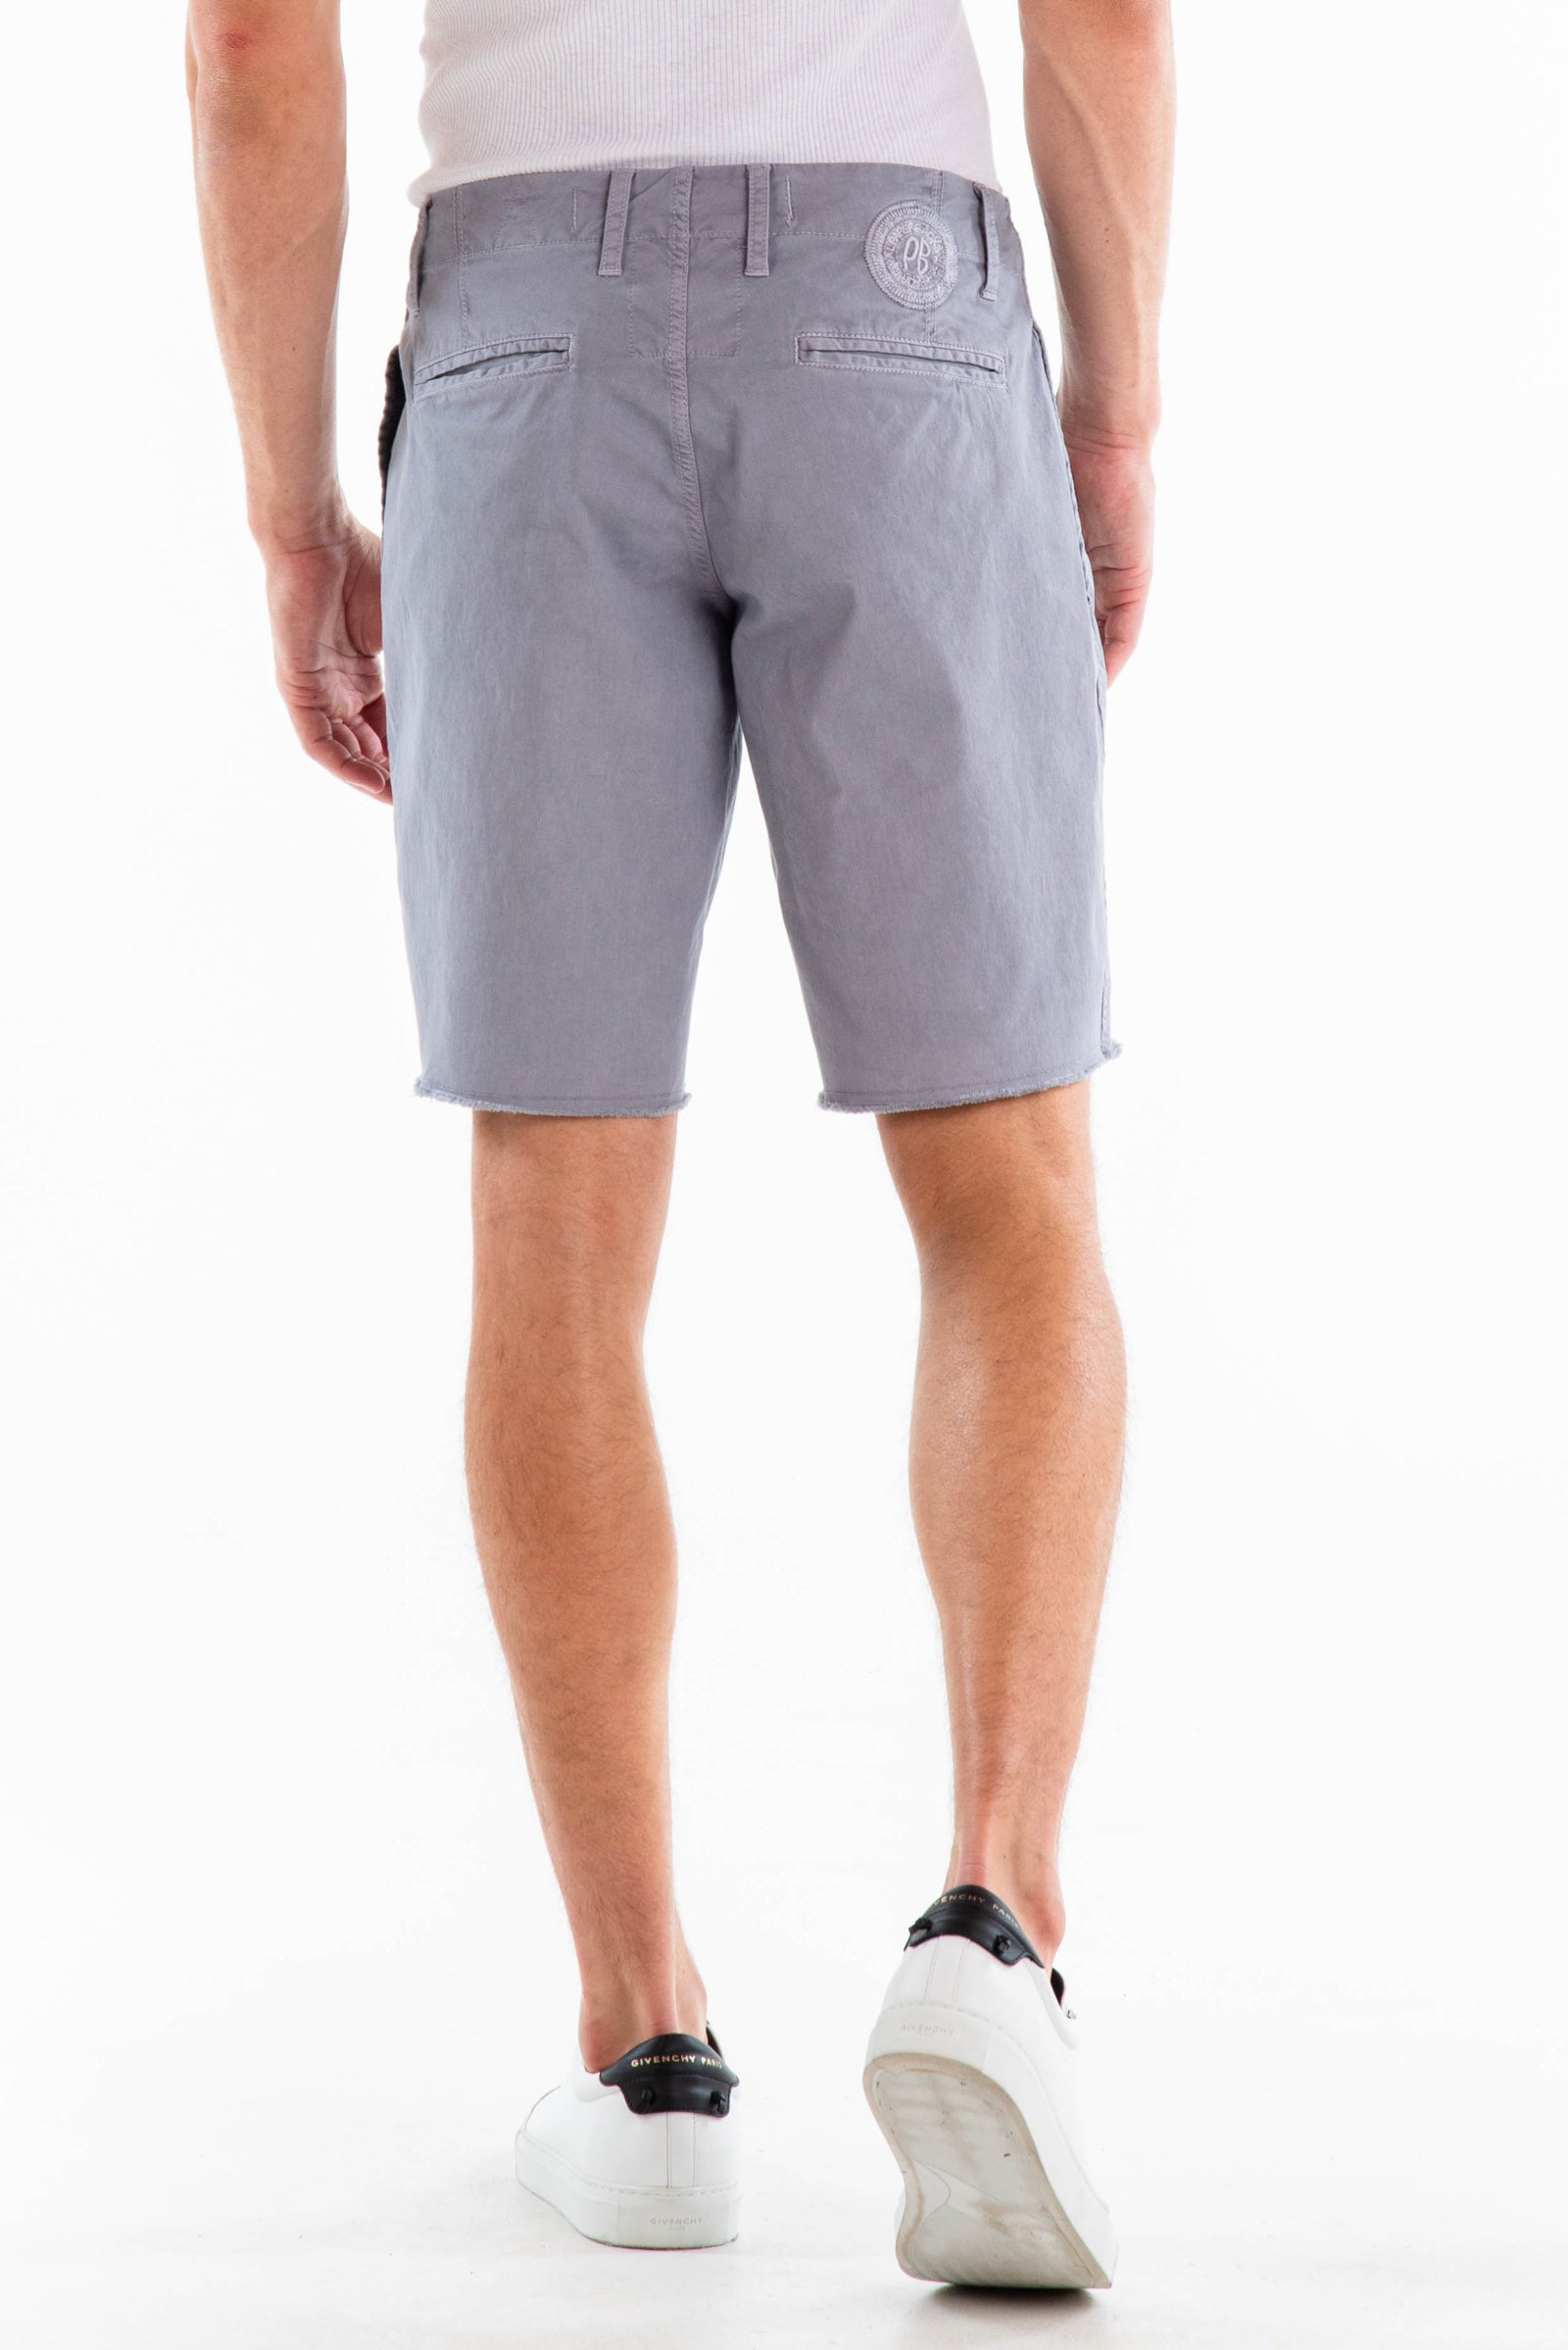 Original Paperbacks Rockland Chino Short in Light Grey on Model Cropped Back View